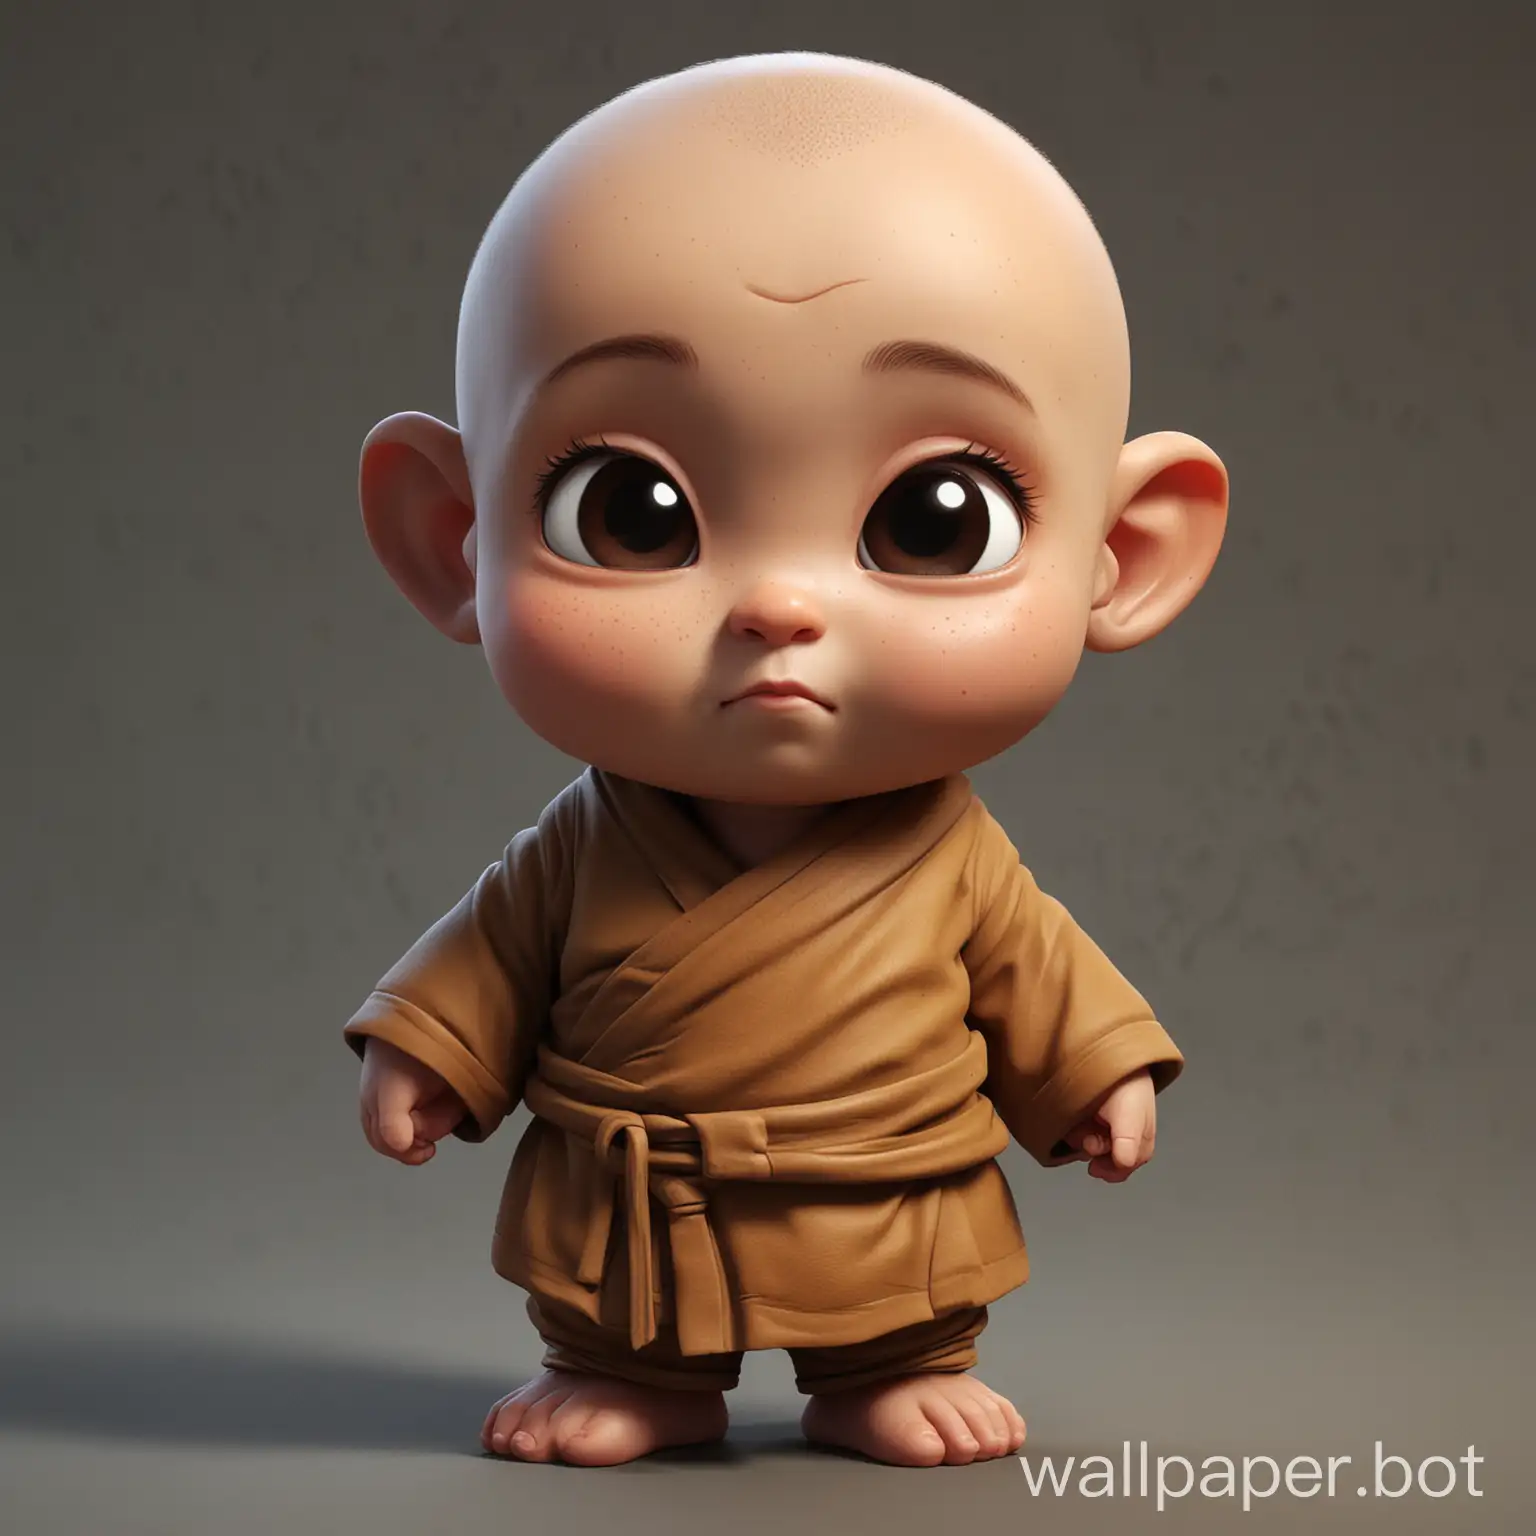 i am a 3d artist, I want to sculpt a cute baby monk, cartoon type, give me a reference or blueprint for that with a align of front, back and side view.